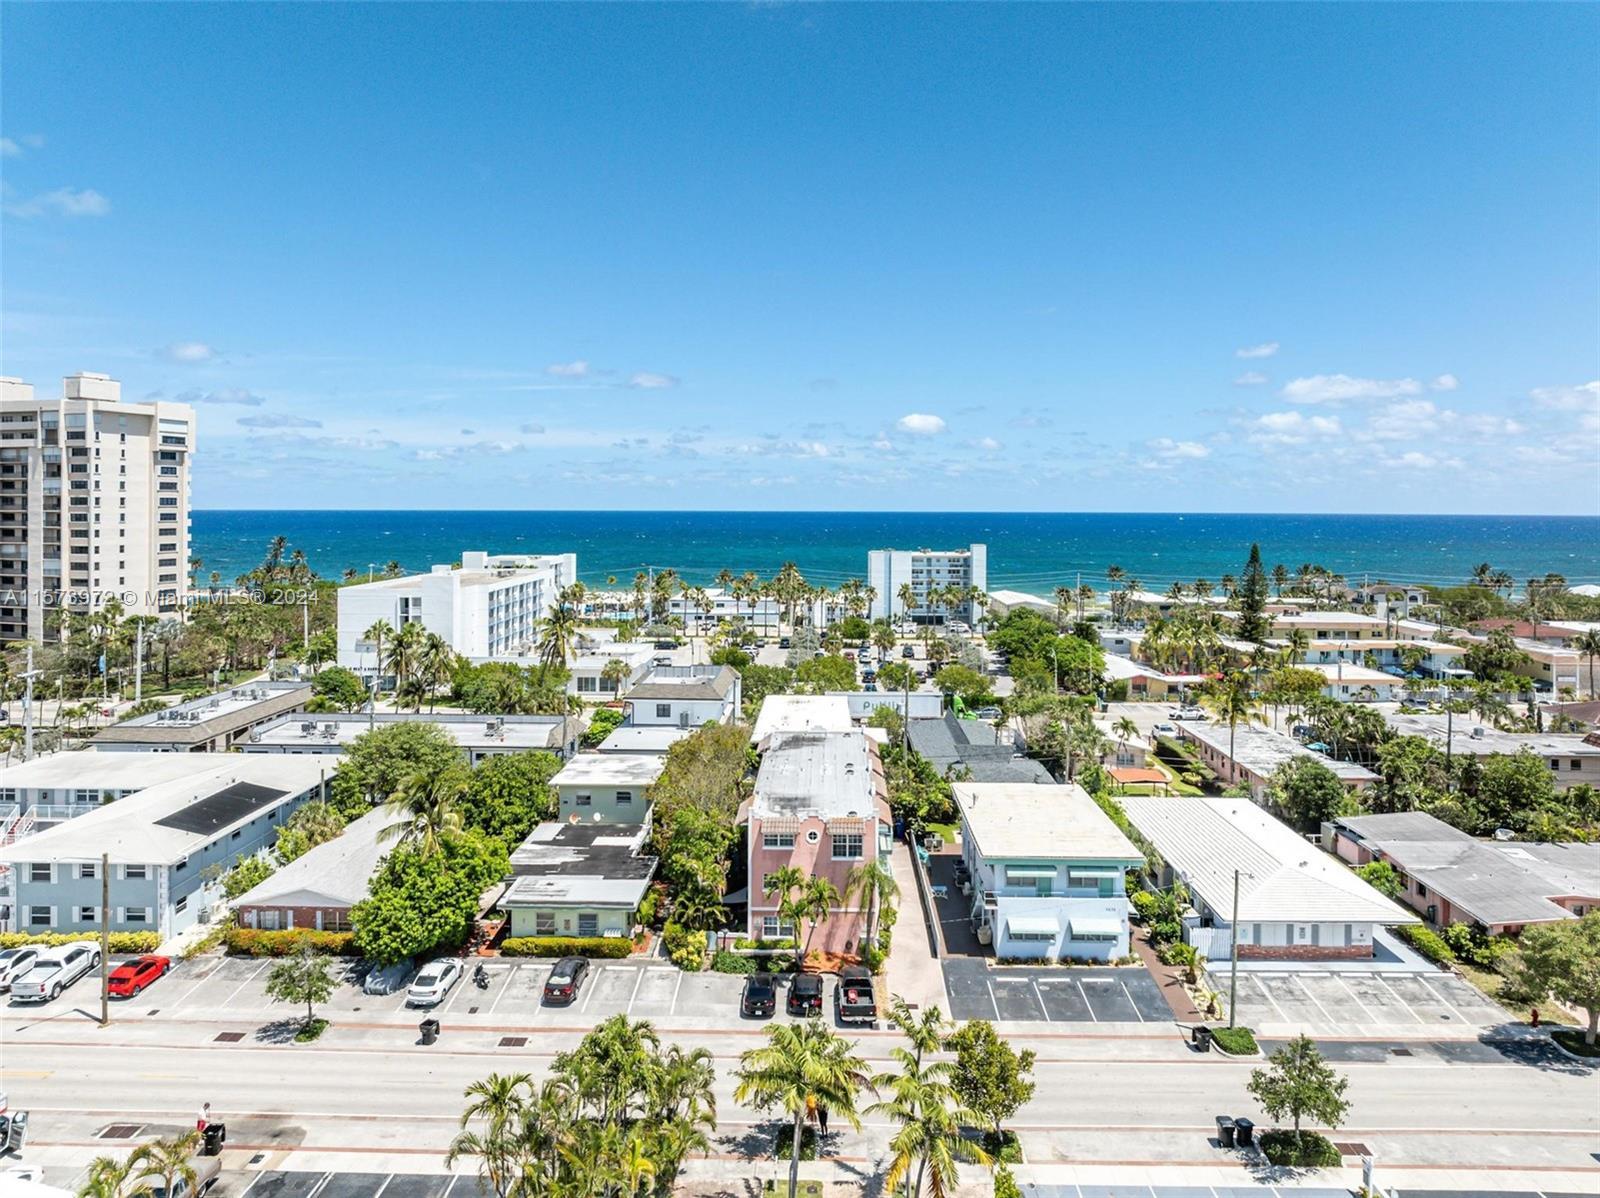 Photo of 4640 Bougainvilla Dr #3 in Lauderdale By The Sea, FL